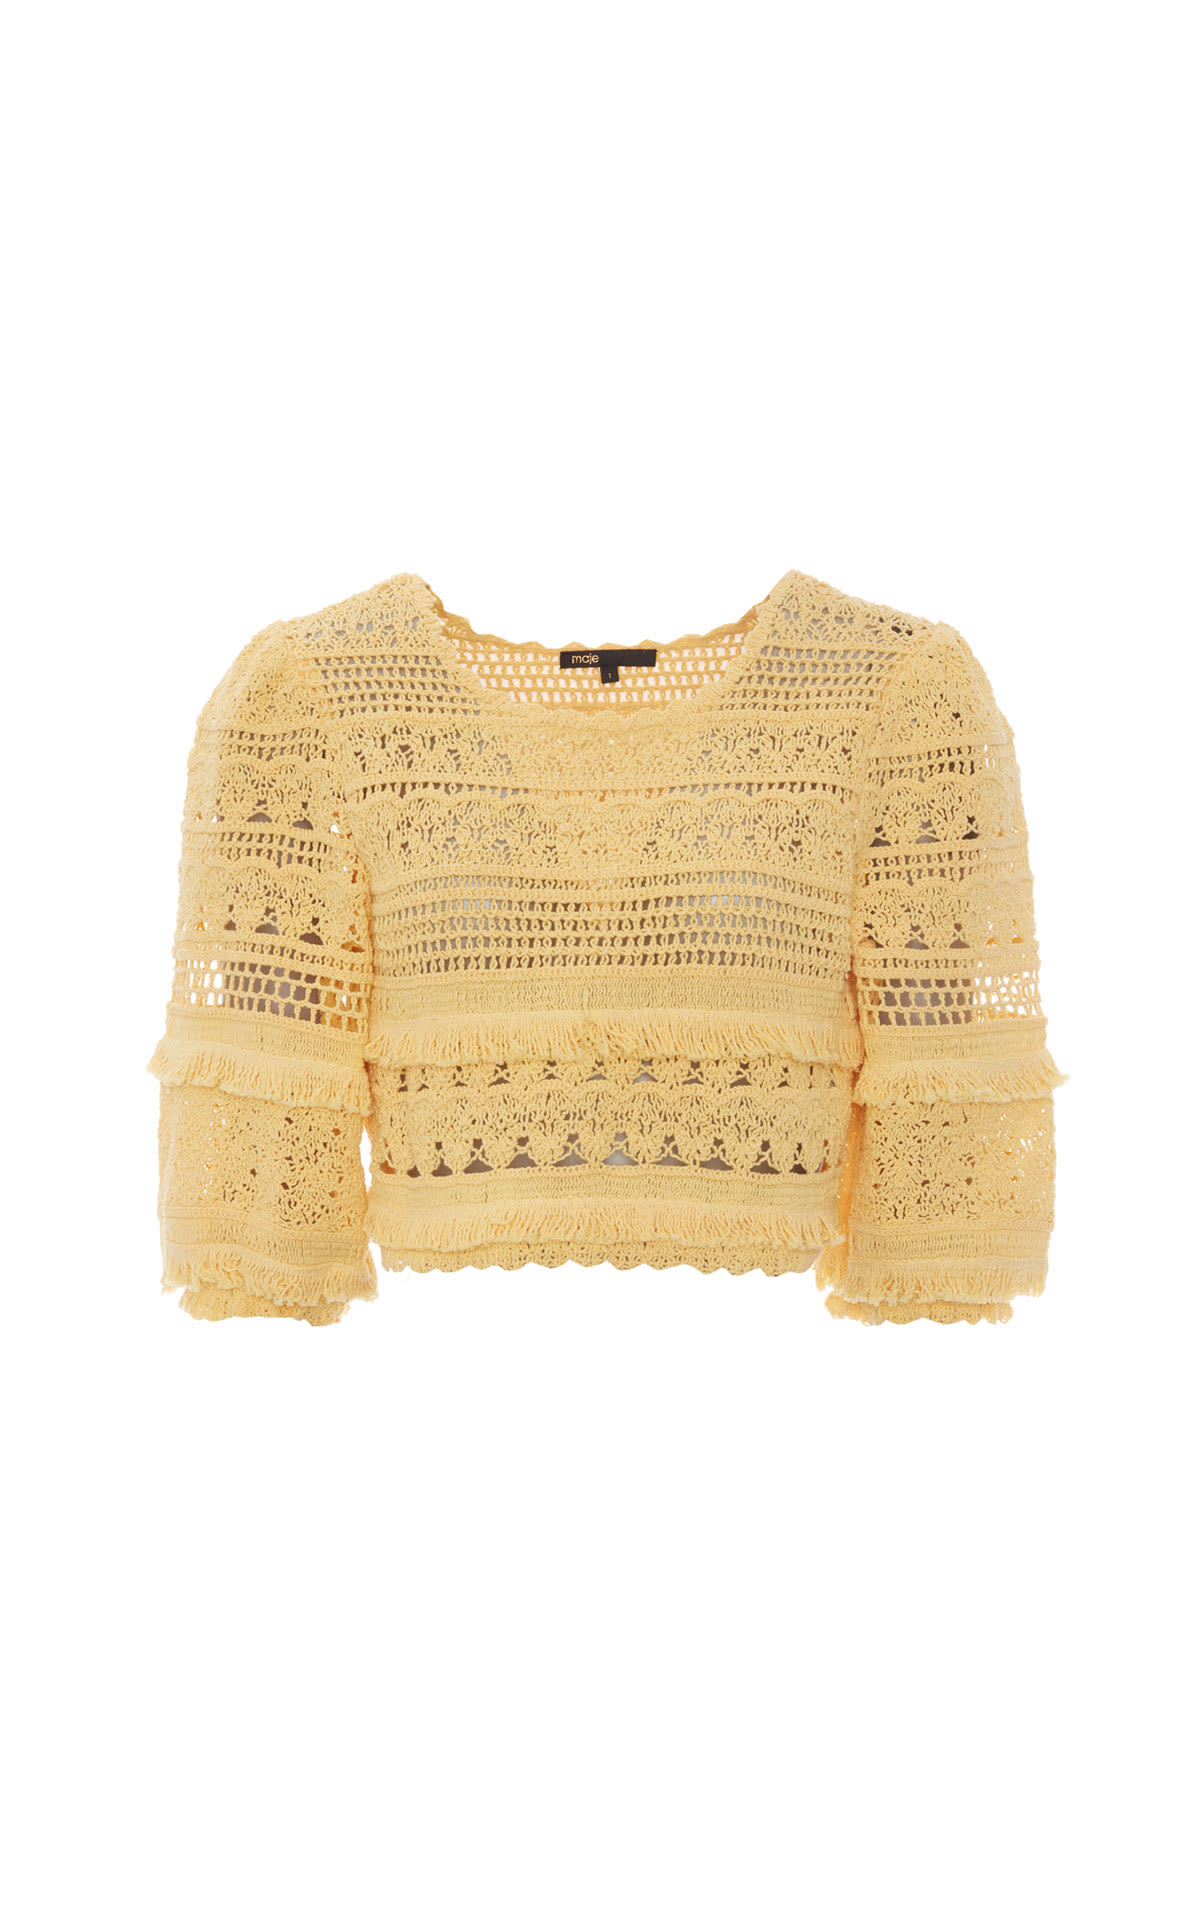 maje Mexi cally knitted top from Bicester Village